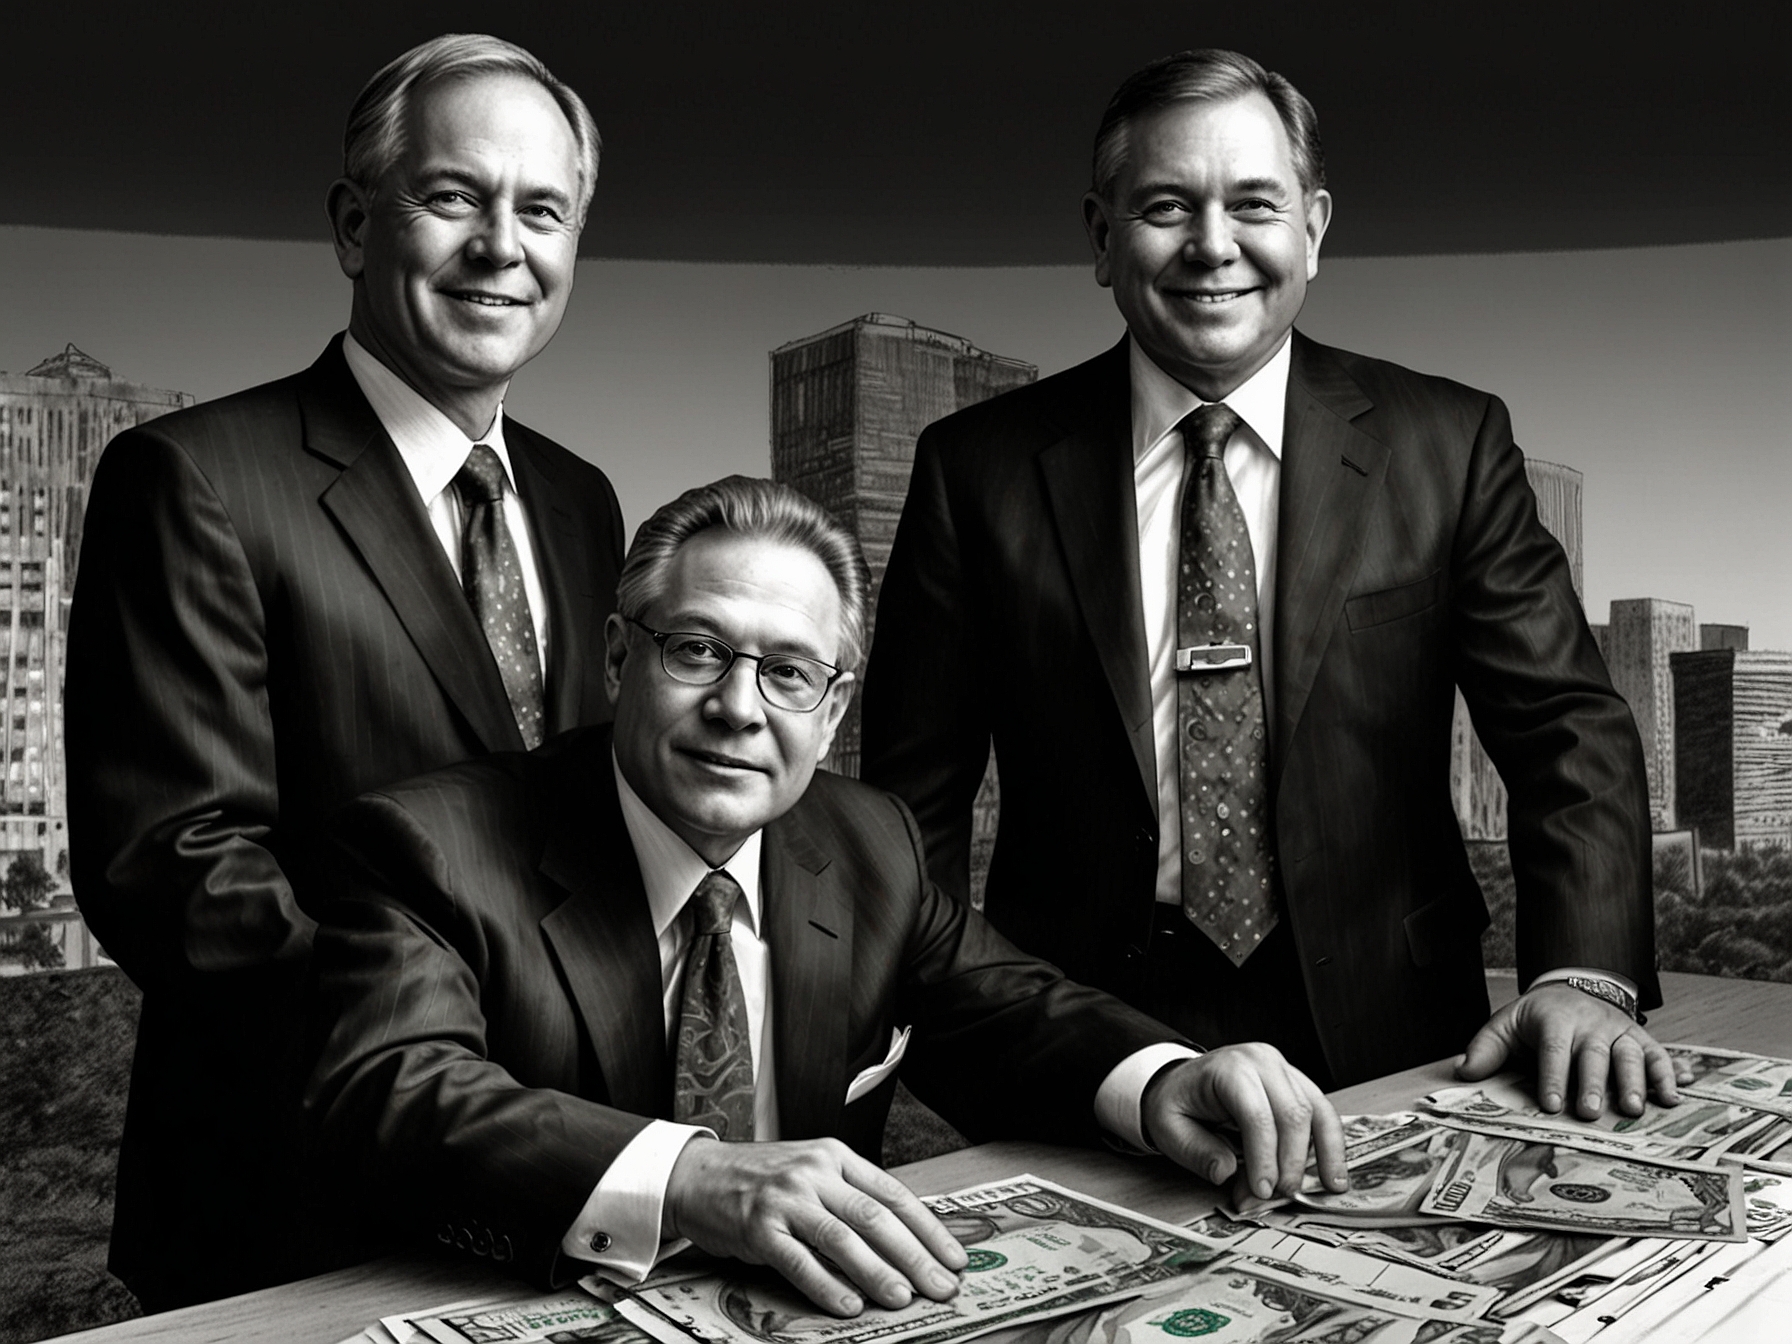 Executives from Hovnanian Enterprises, Nvidia, Applied Materials, and Baker Hughes with dollar values representing the sale amounts, emphasizing key insider trades and financial strategies.